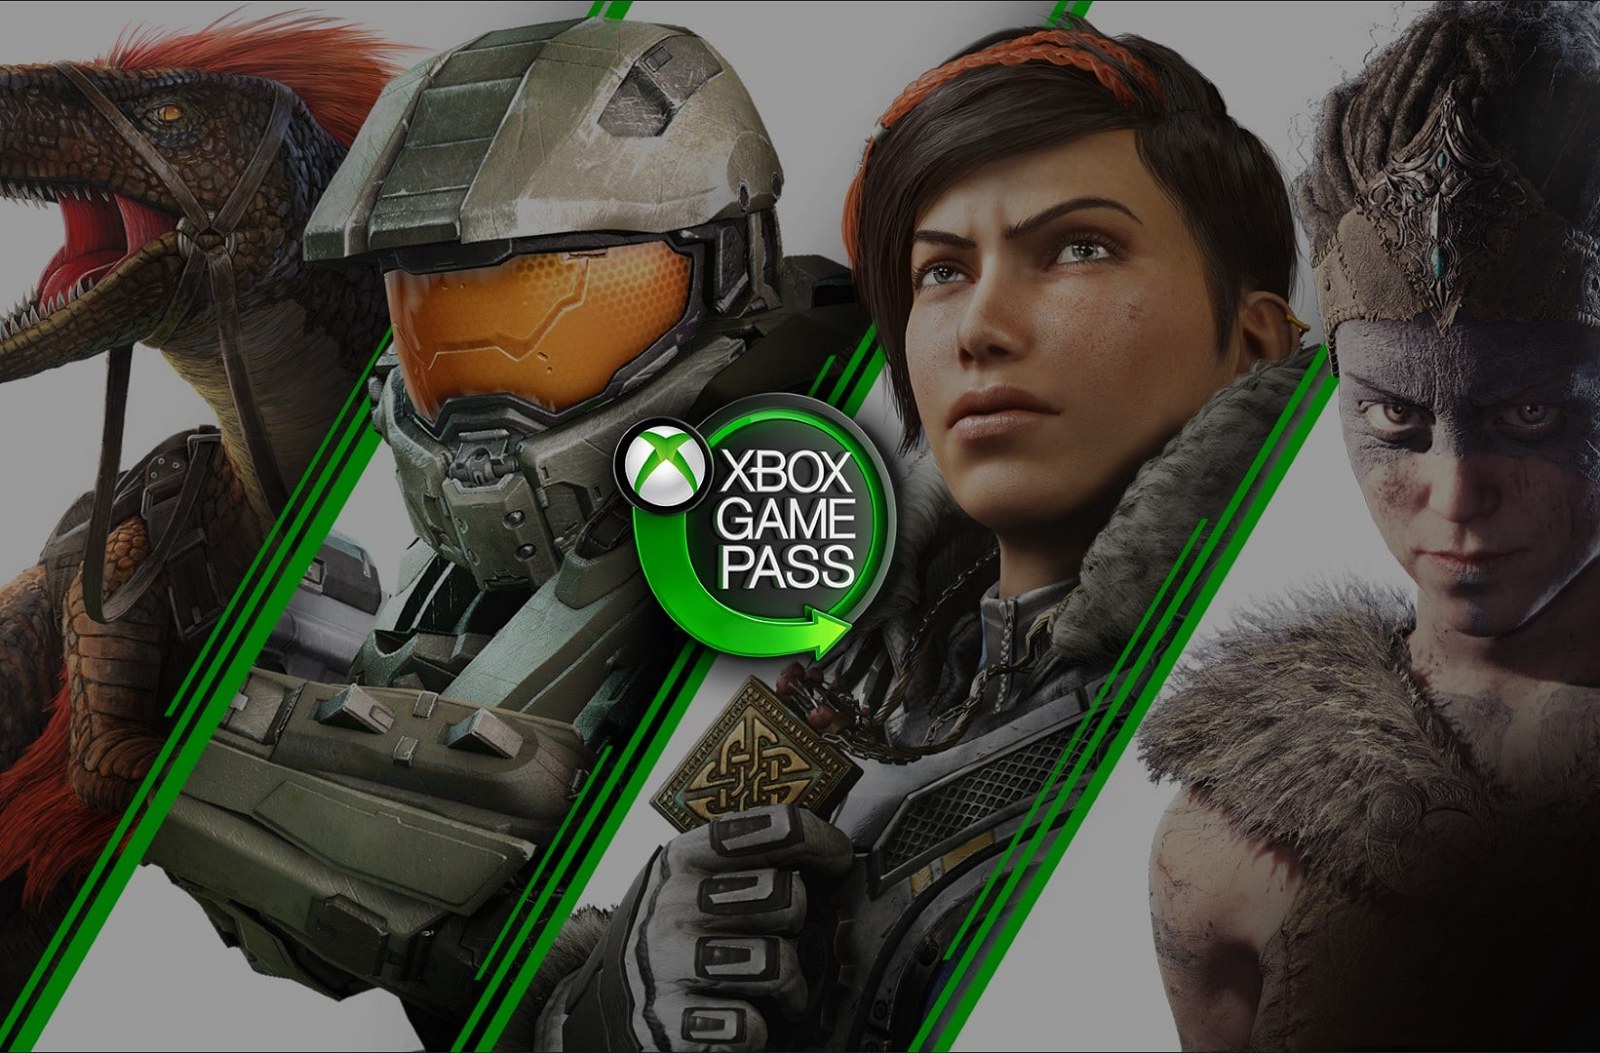 Microsoft to retire Xbox Live Gold, will be replaced by Game Pass Core